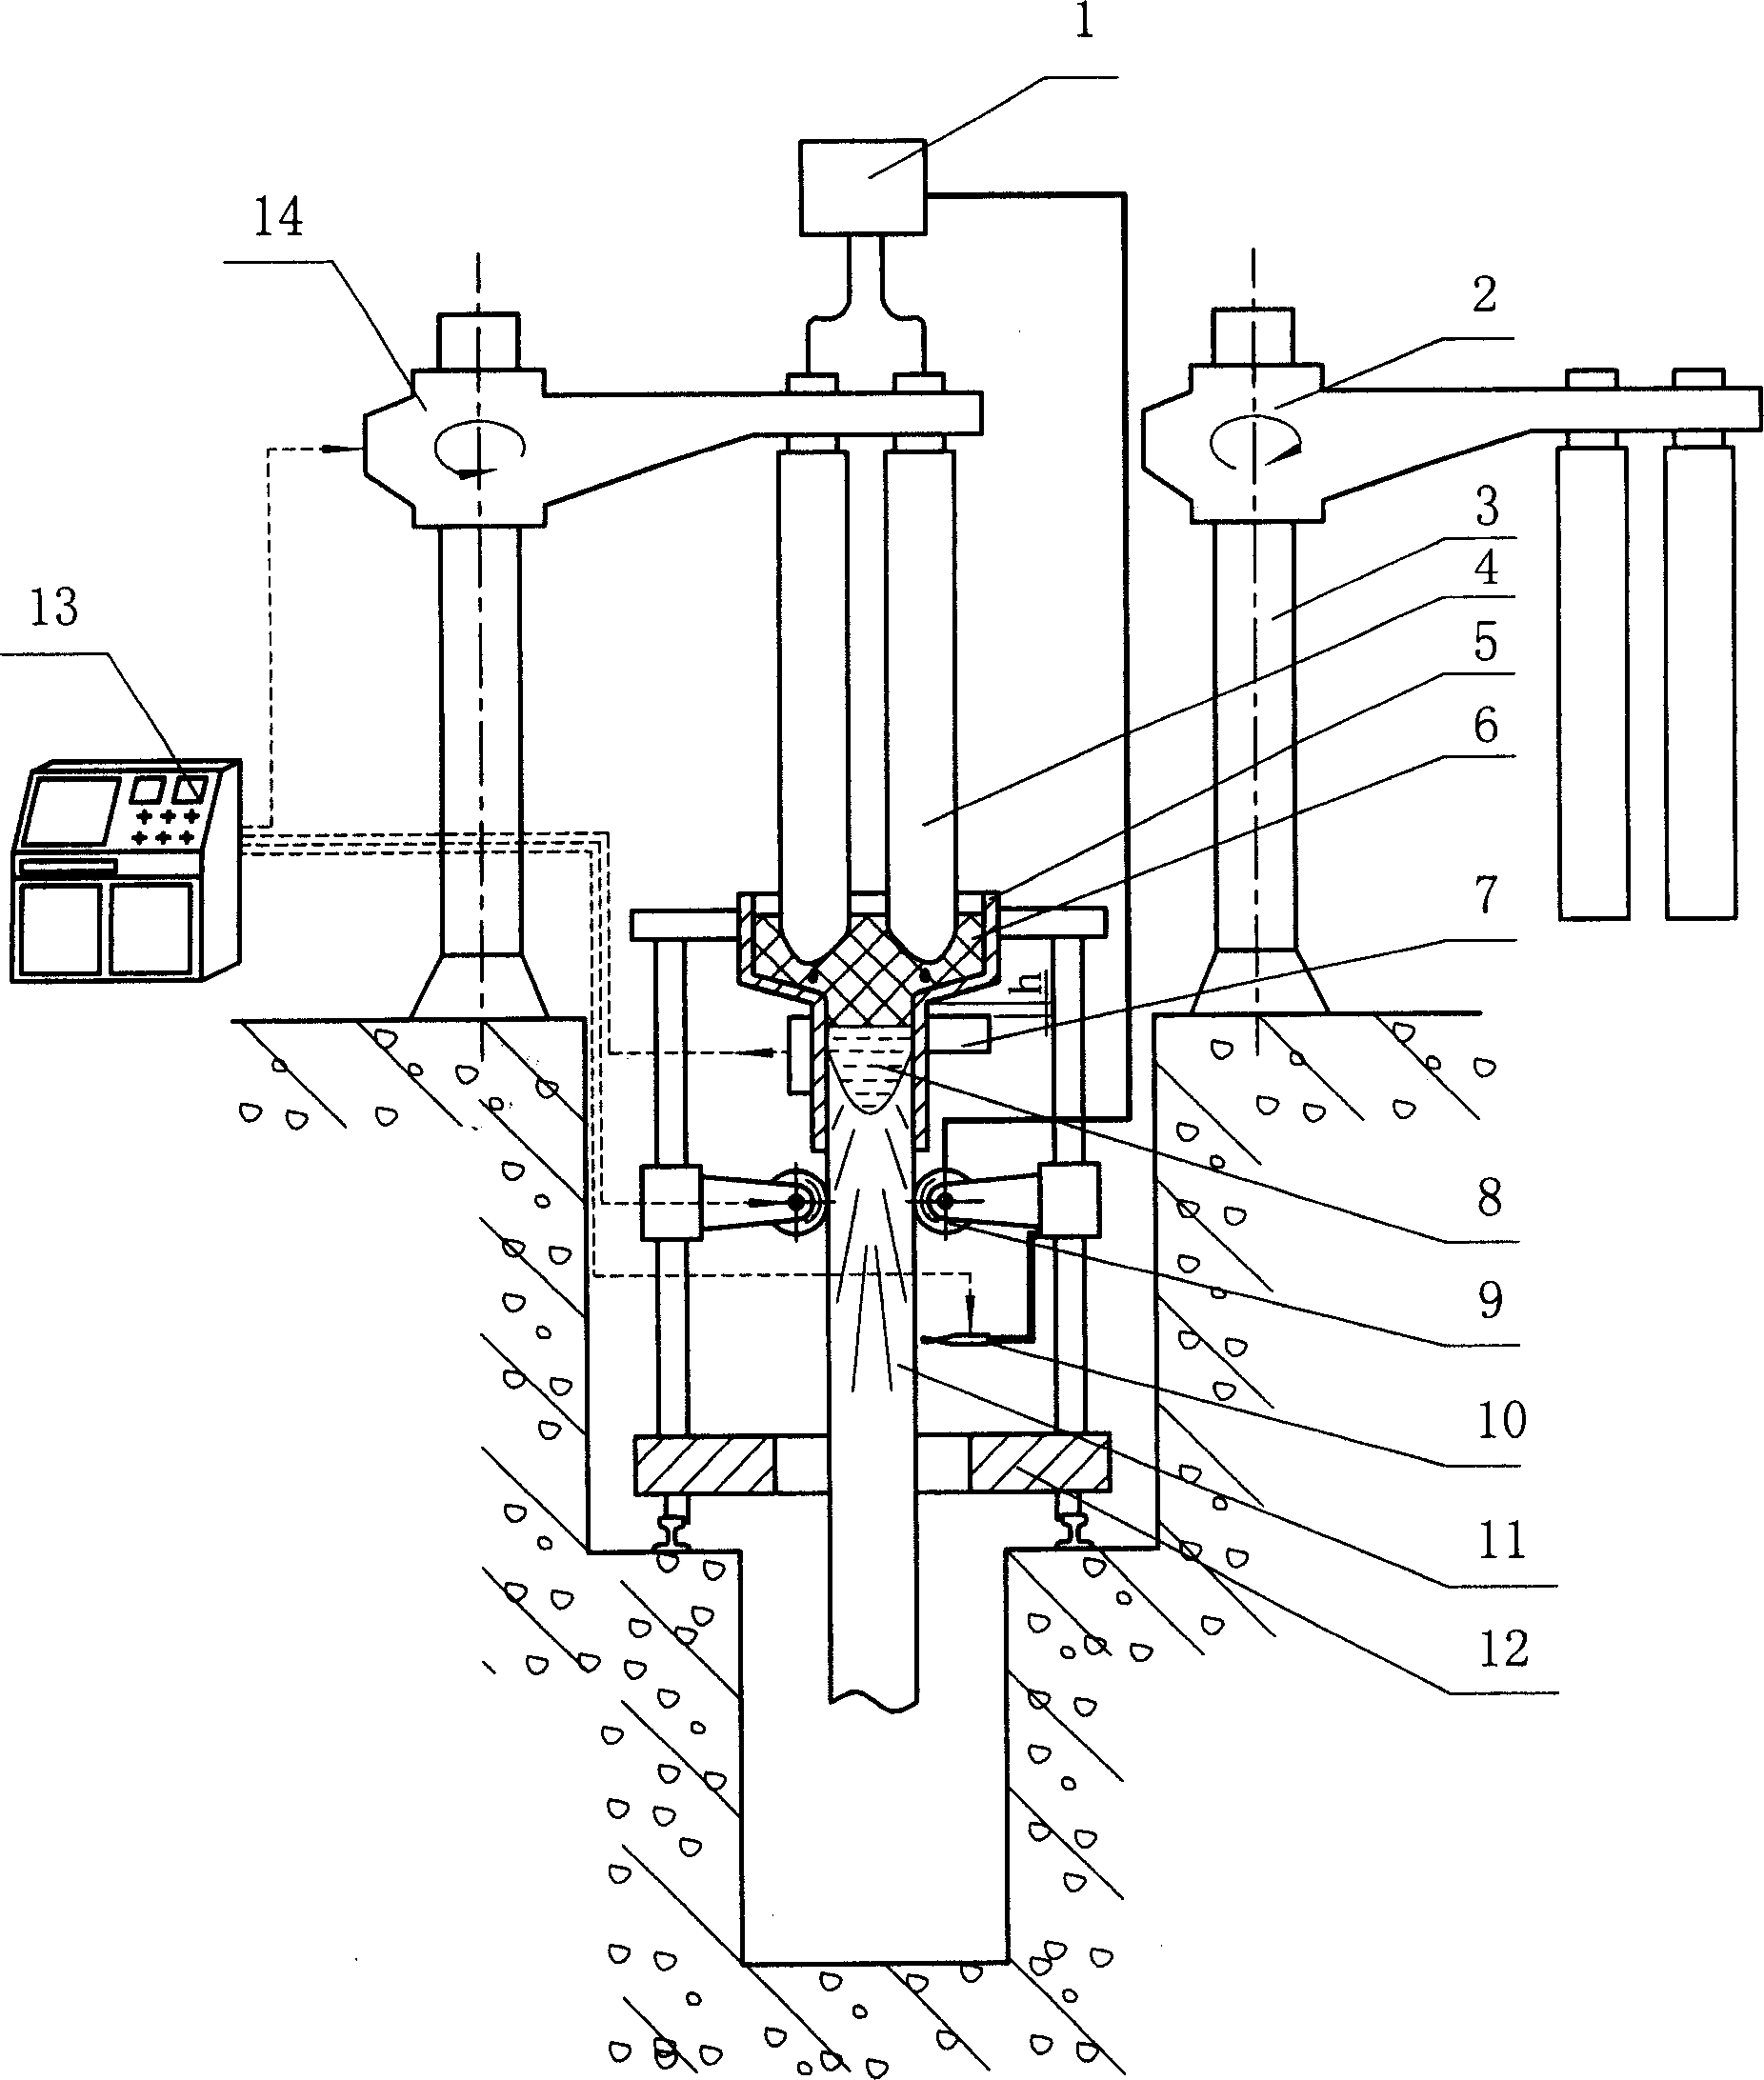 Continuouslly-casting electroslag furnace